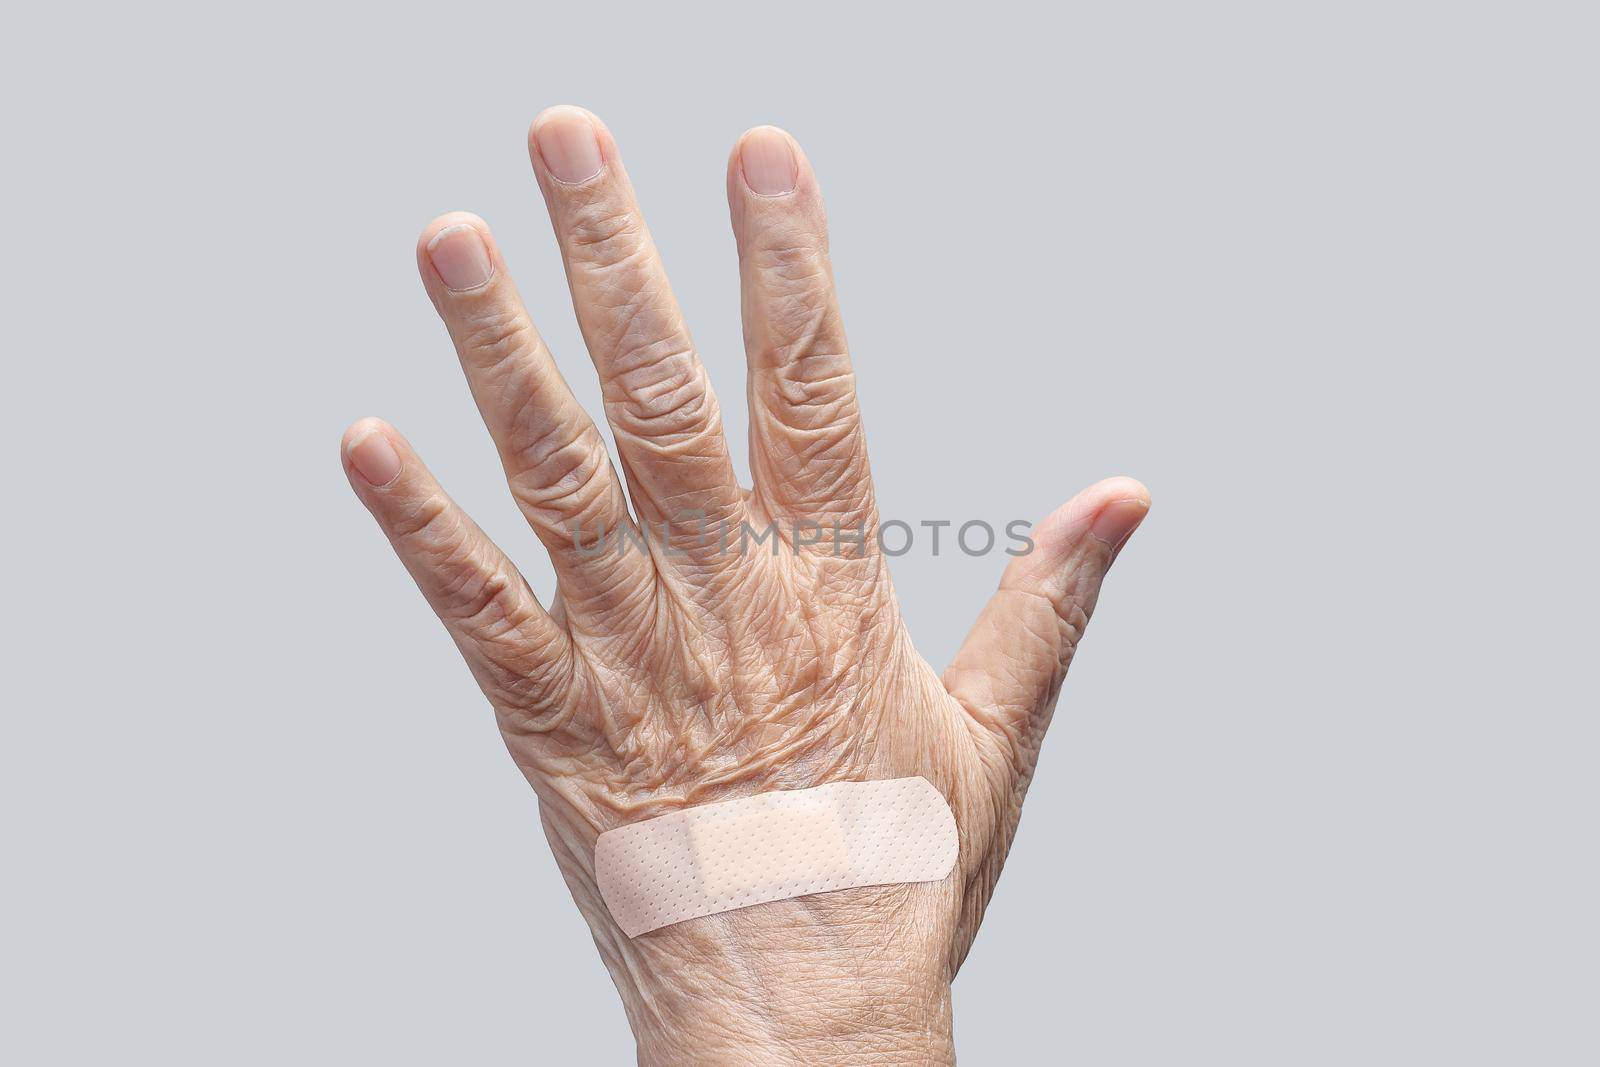 Elderly woman adhesive bandage on her hand by toa55